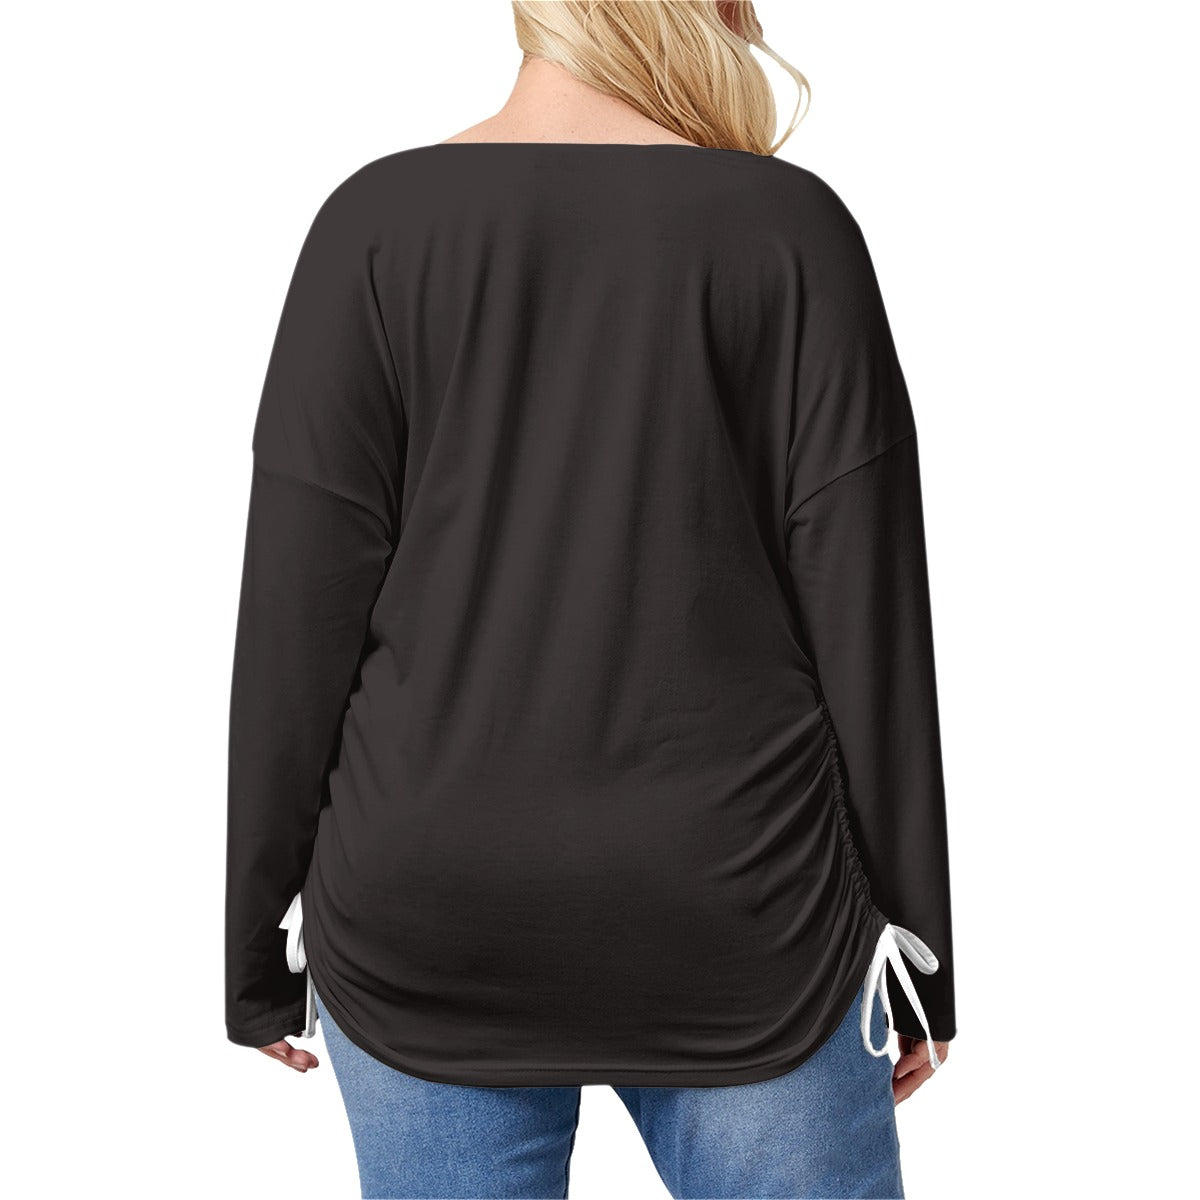 Plus size Yoga Top - Women’s V-neck ZenT-shirt With Side Drawstring - Personal Hour 